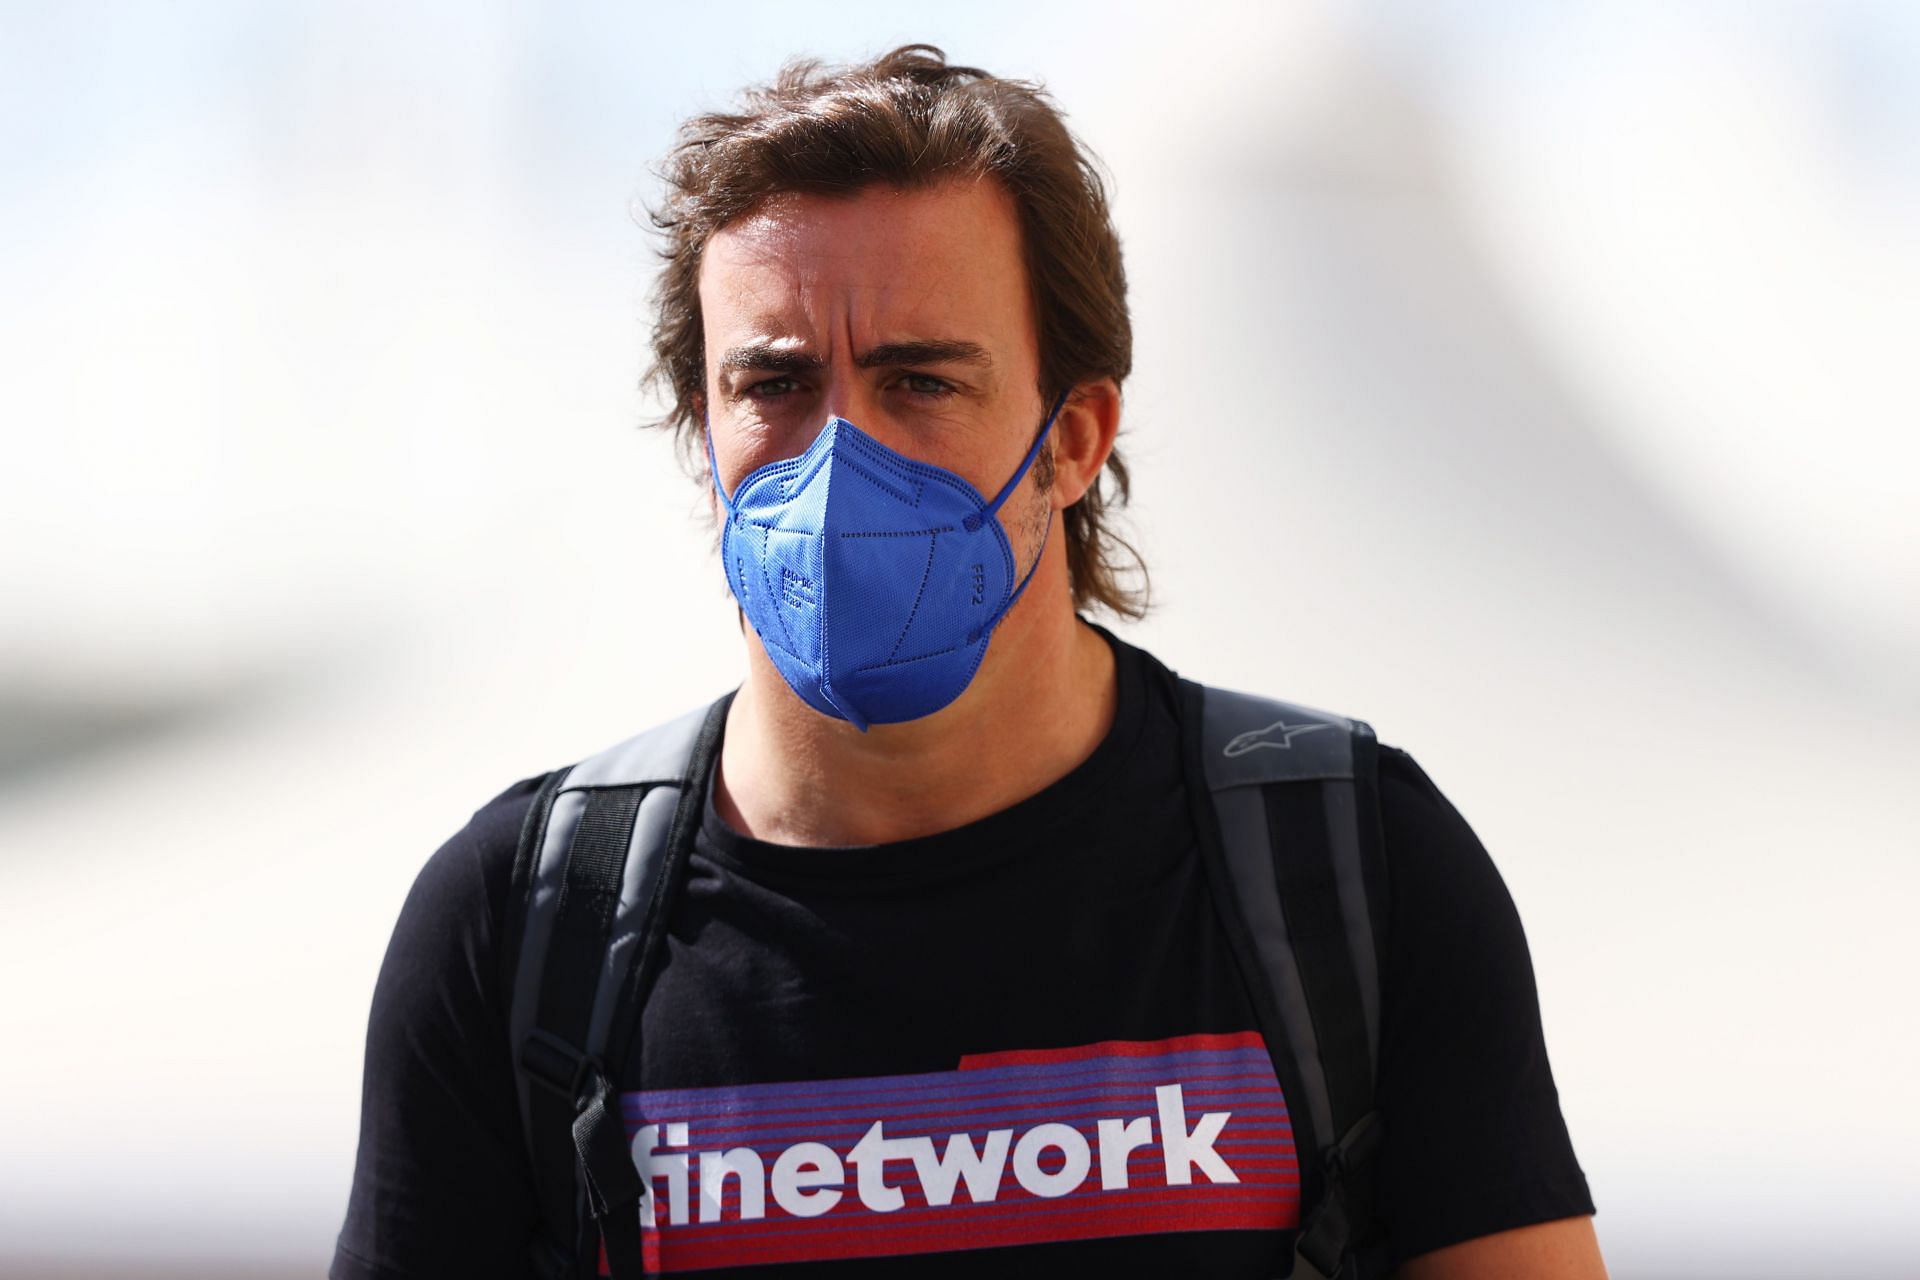 Fernando Alonso walks in the Paddock during previews in Abu Dhabi, United Arab Emirates (Photo by Bryn Lennon/Getty Images)